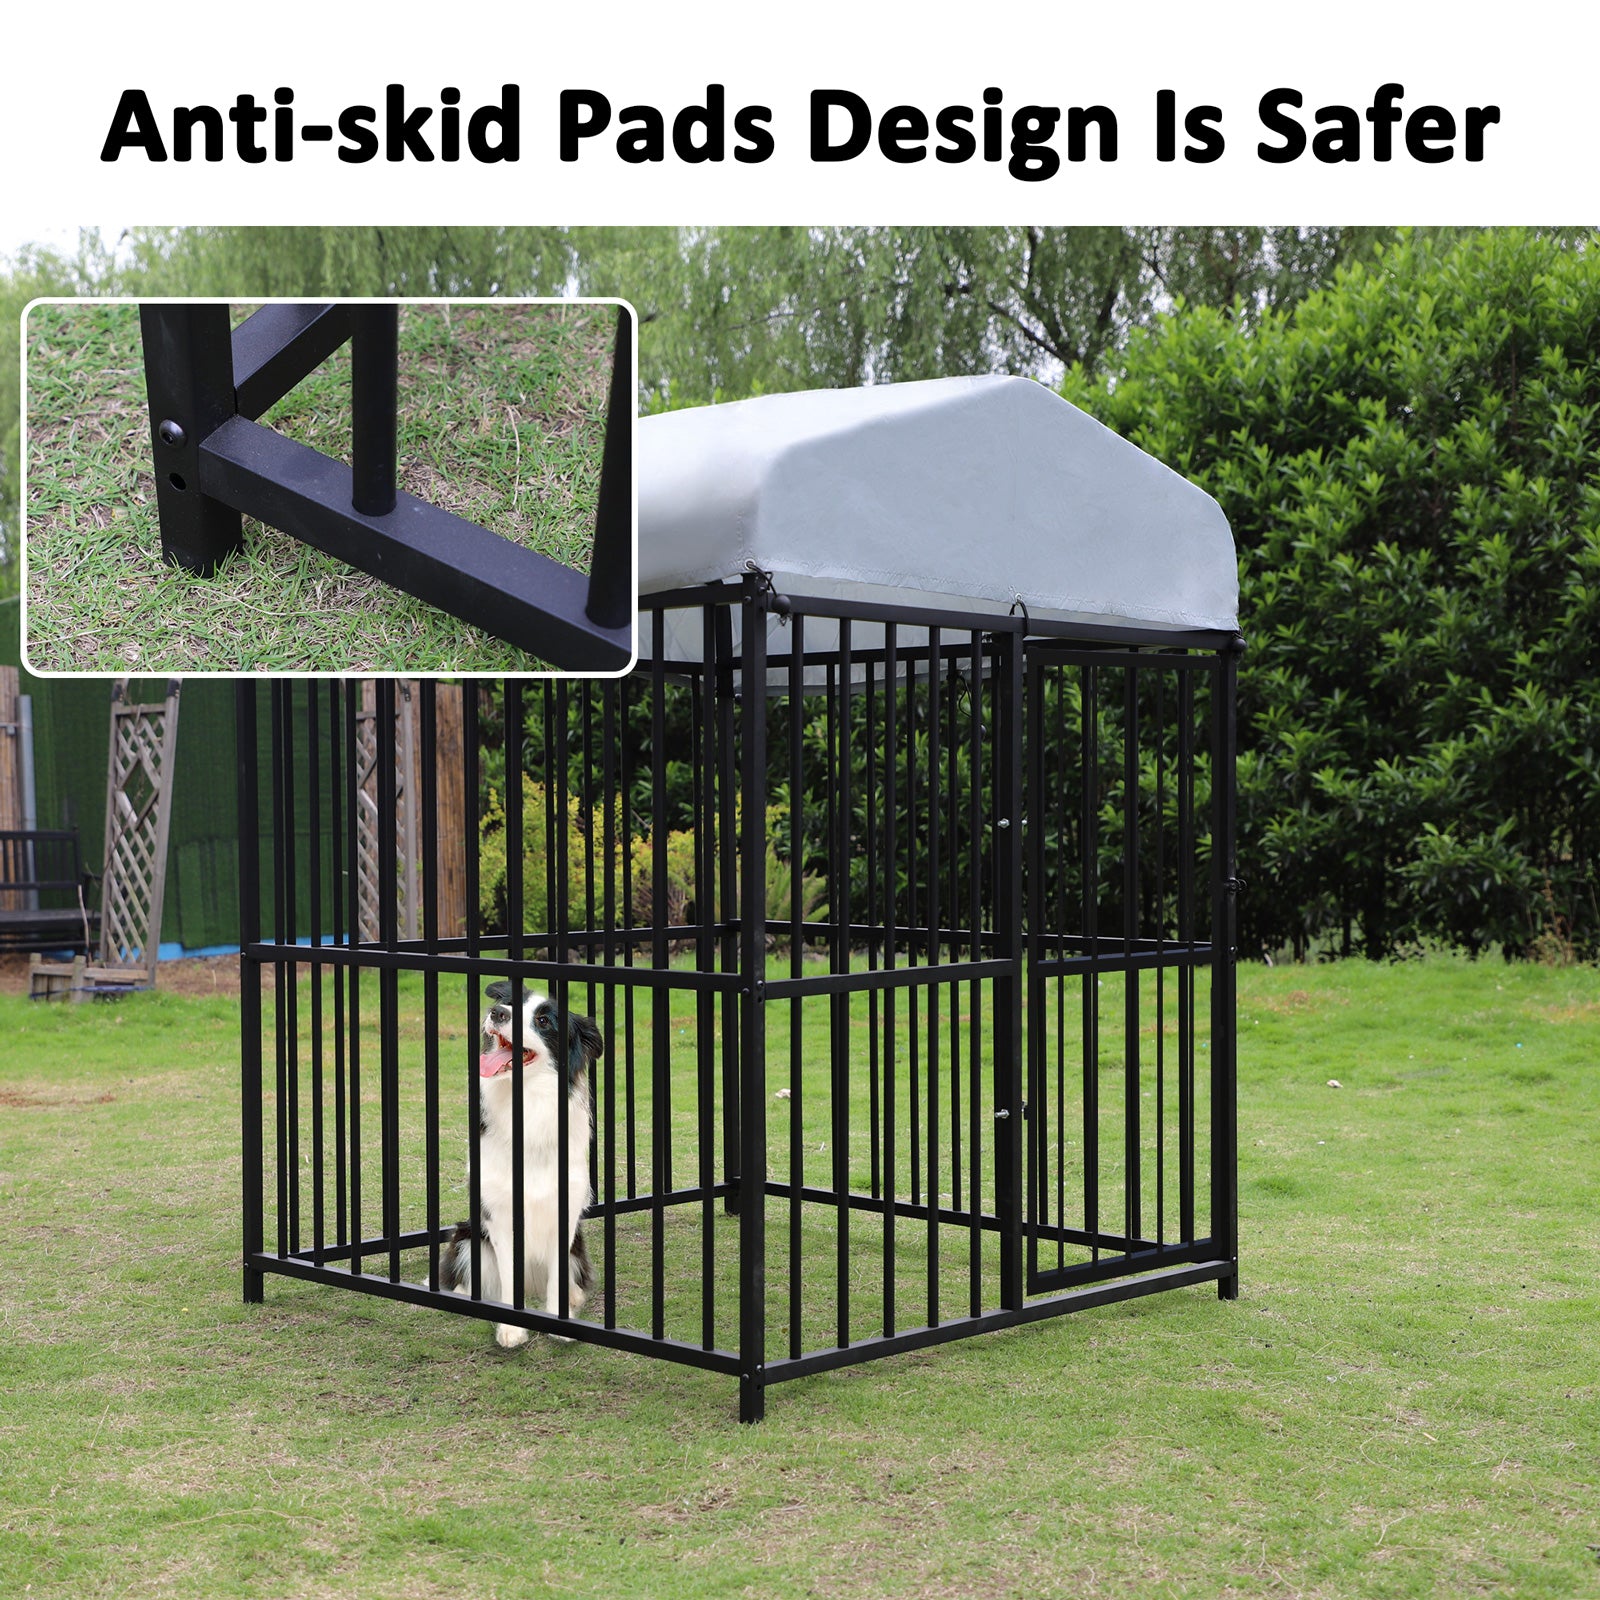 4.9'x4.9'x5.9' Outdoor Medium Wrought Iron Kennel Enclosure, Playpen Pet Kennel with Waterproof UV Resistant Cover and Security Lock, Black